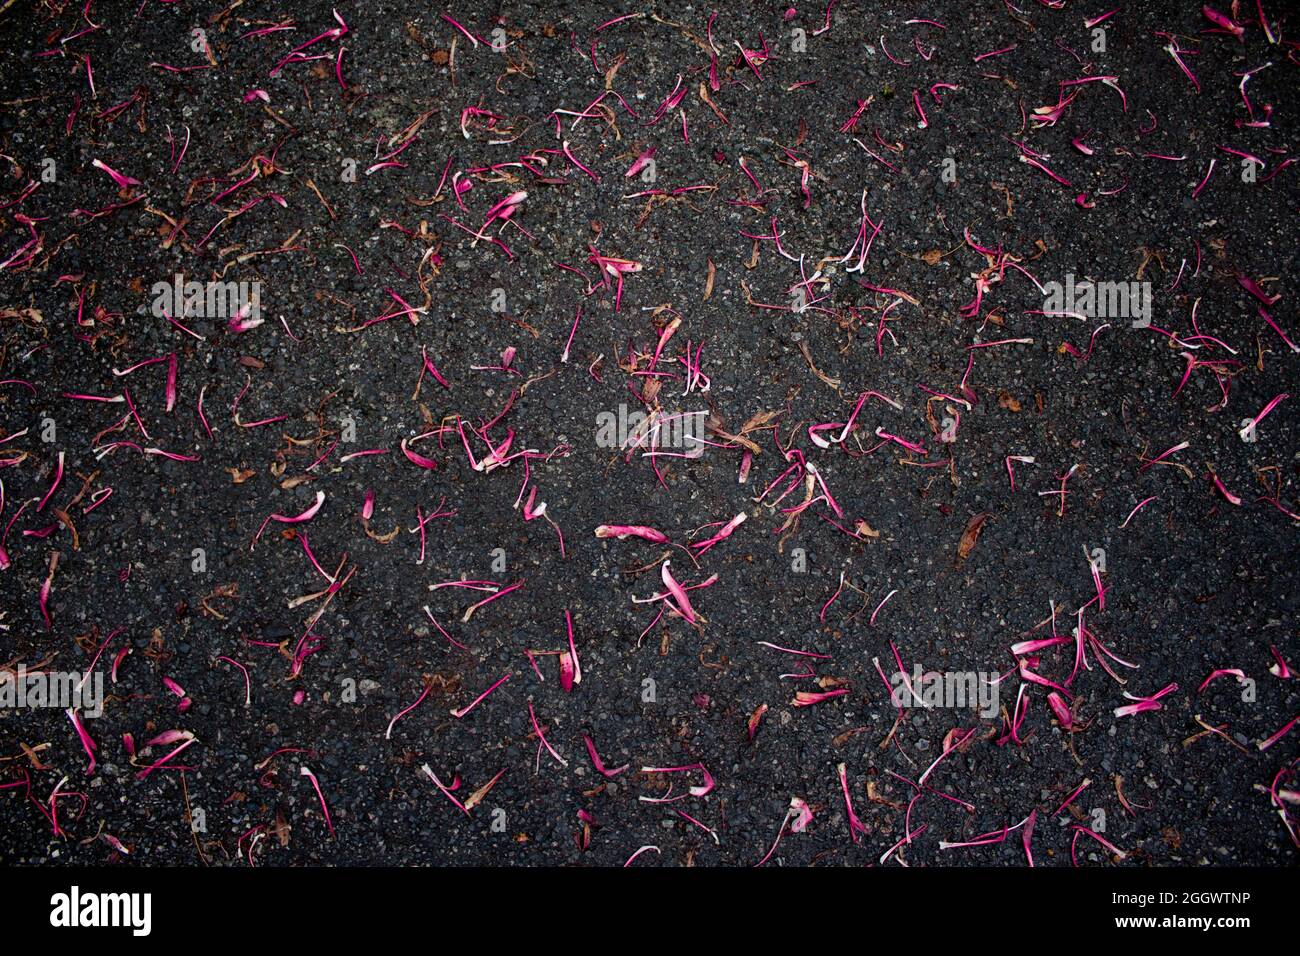 Purple pink blossom petals falling on the road after rain Stock Photo